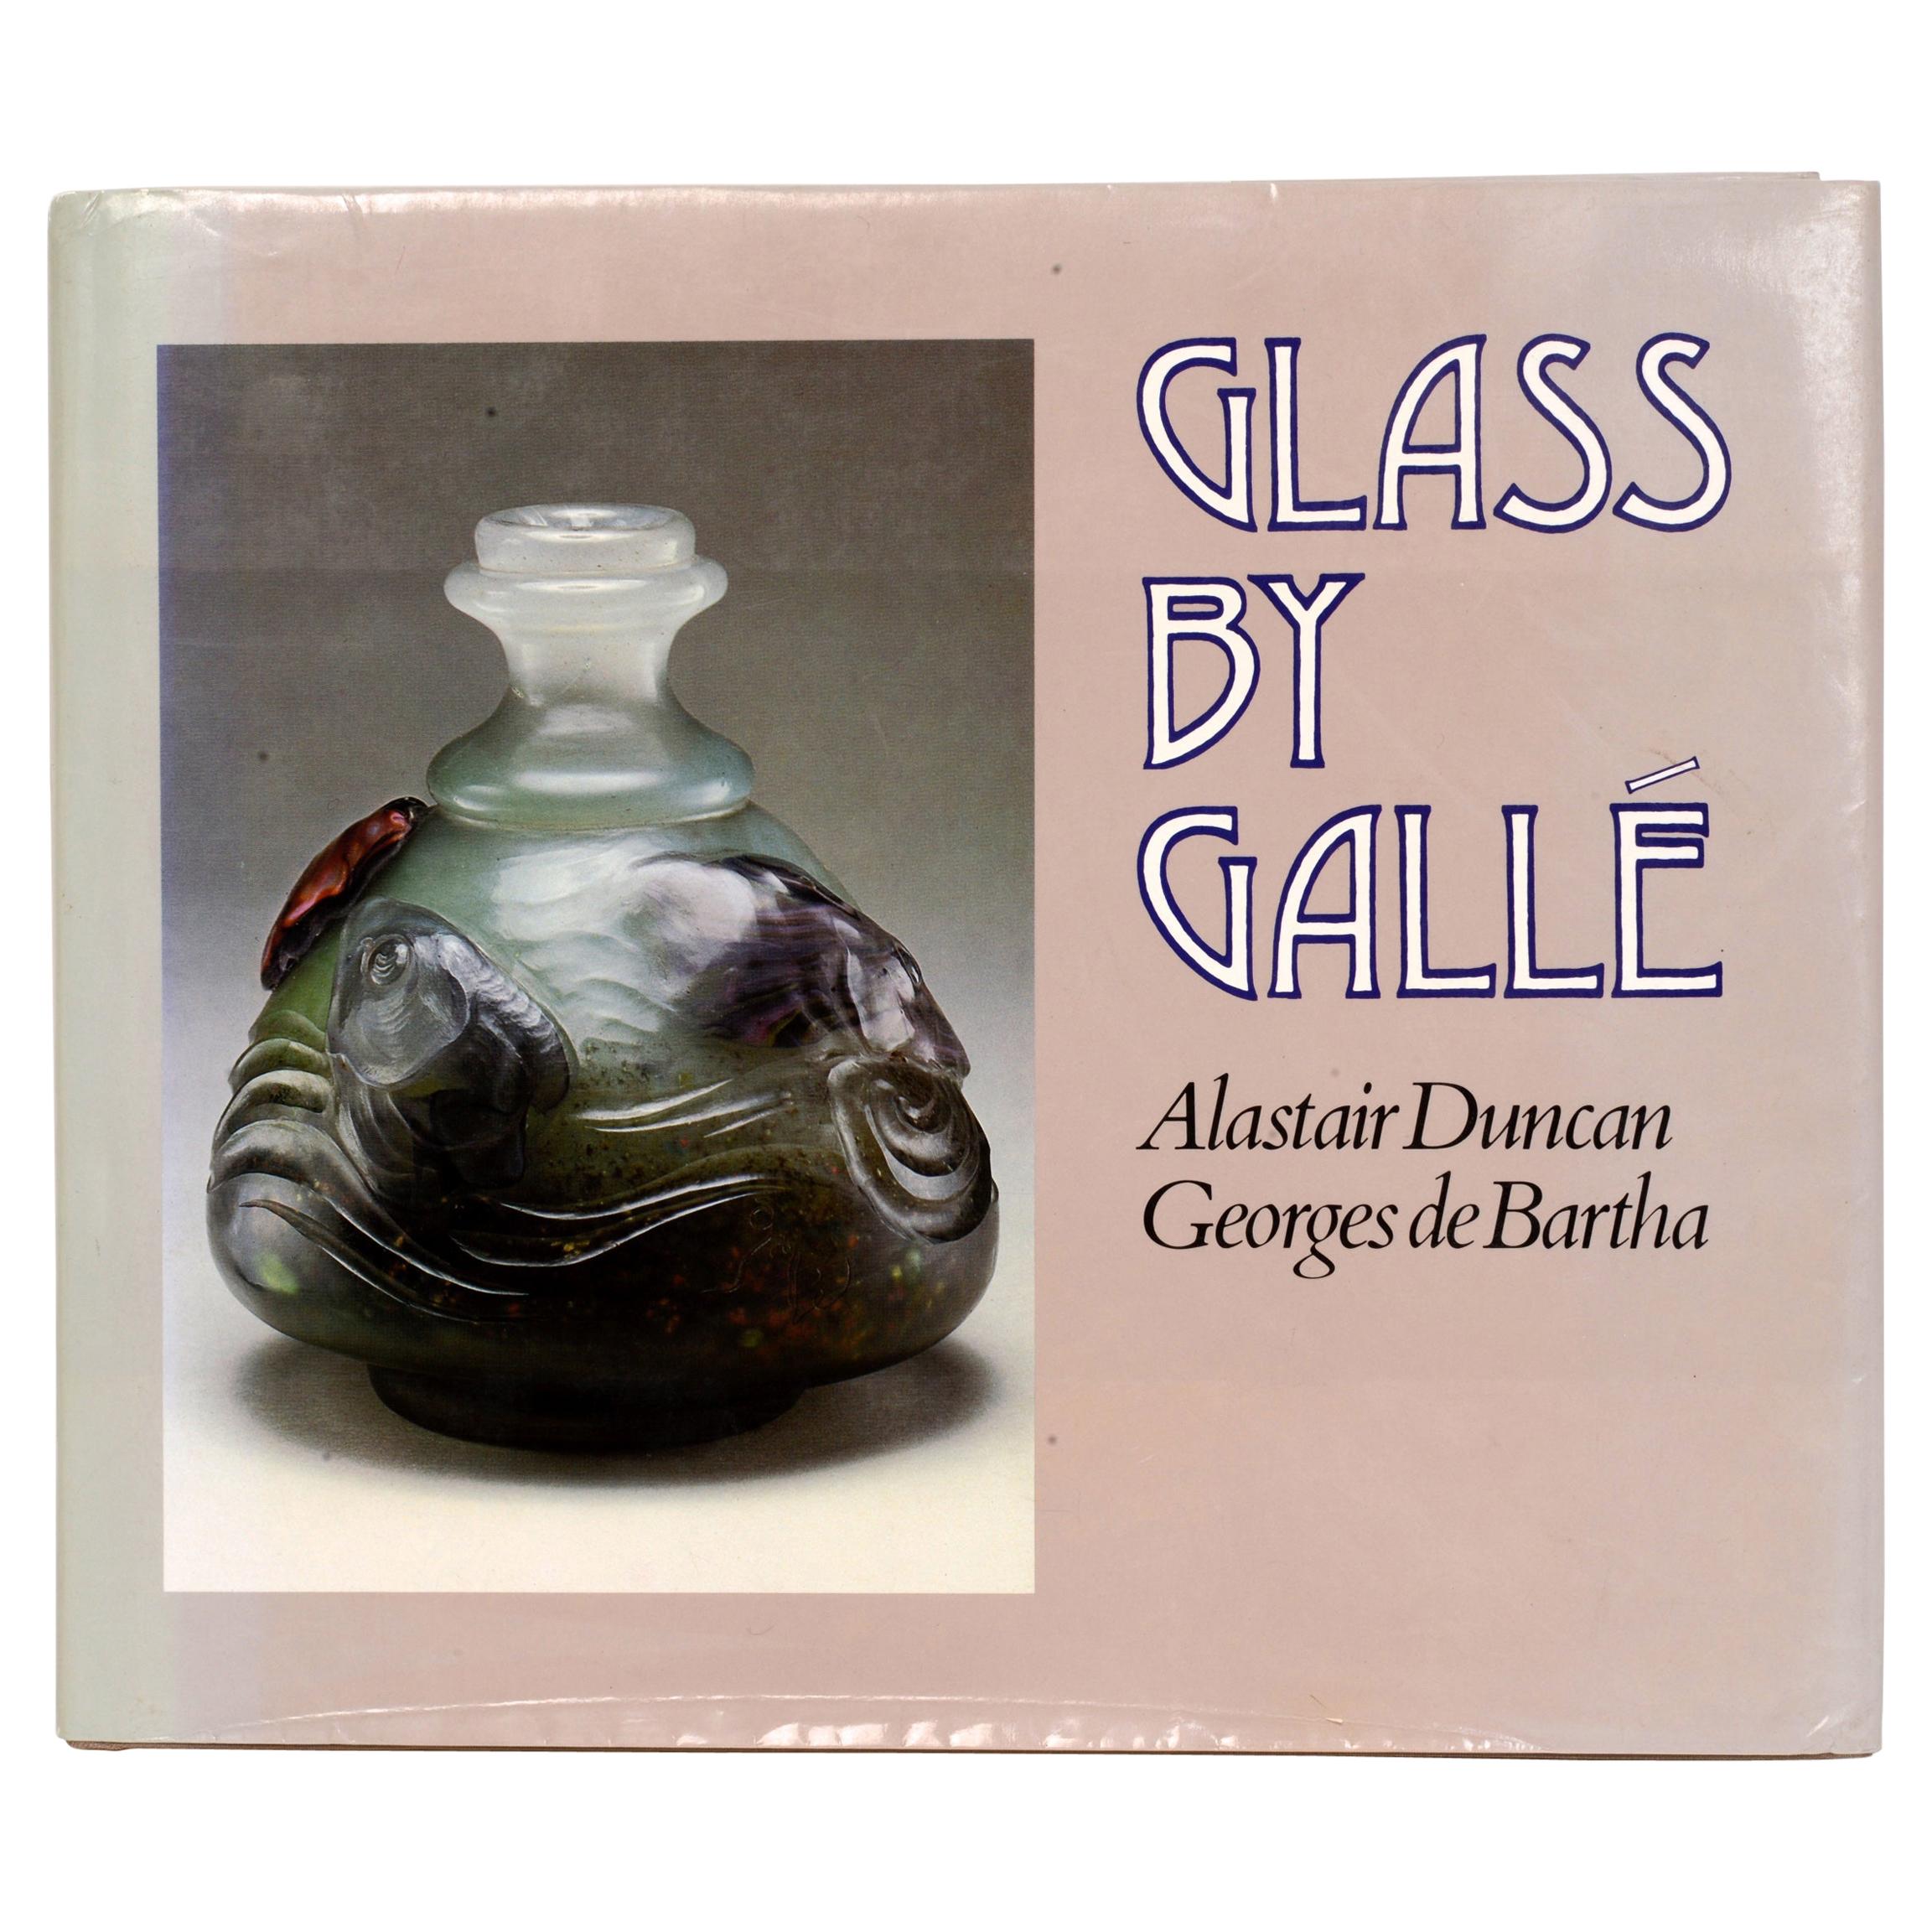 Glass By Gallé by Alastair Duncan and Georges de Bartha, 1st Edition